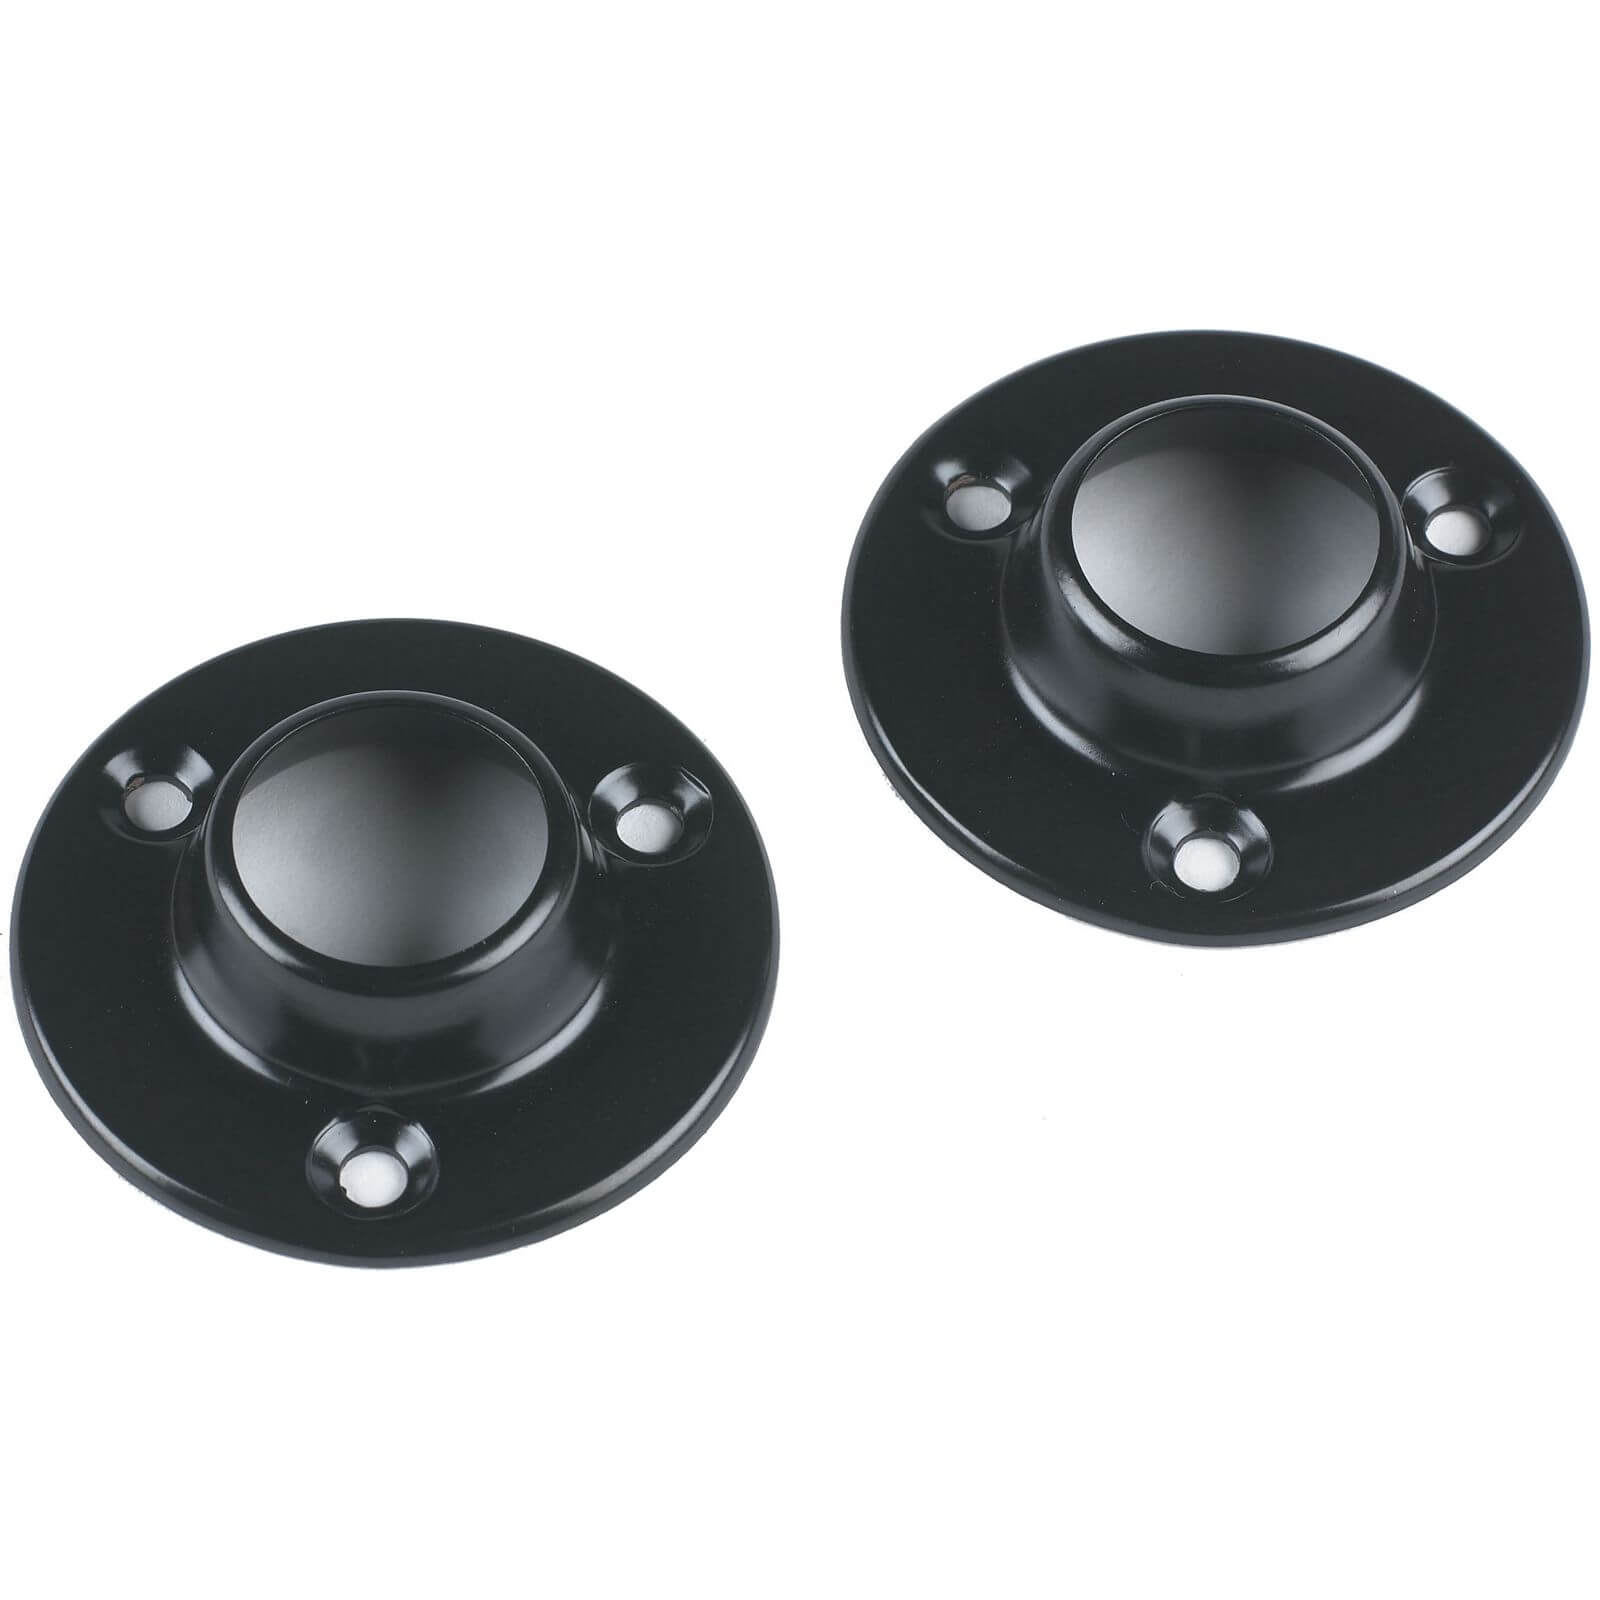 Photo of Deluxe Sockets - Black - 19mm